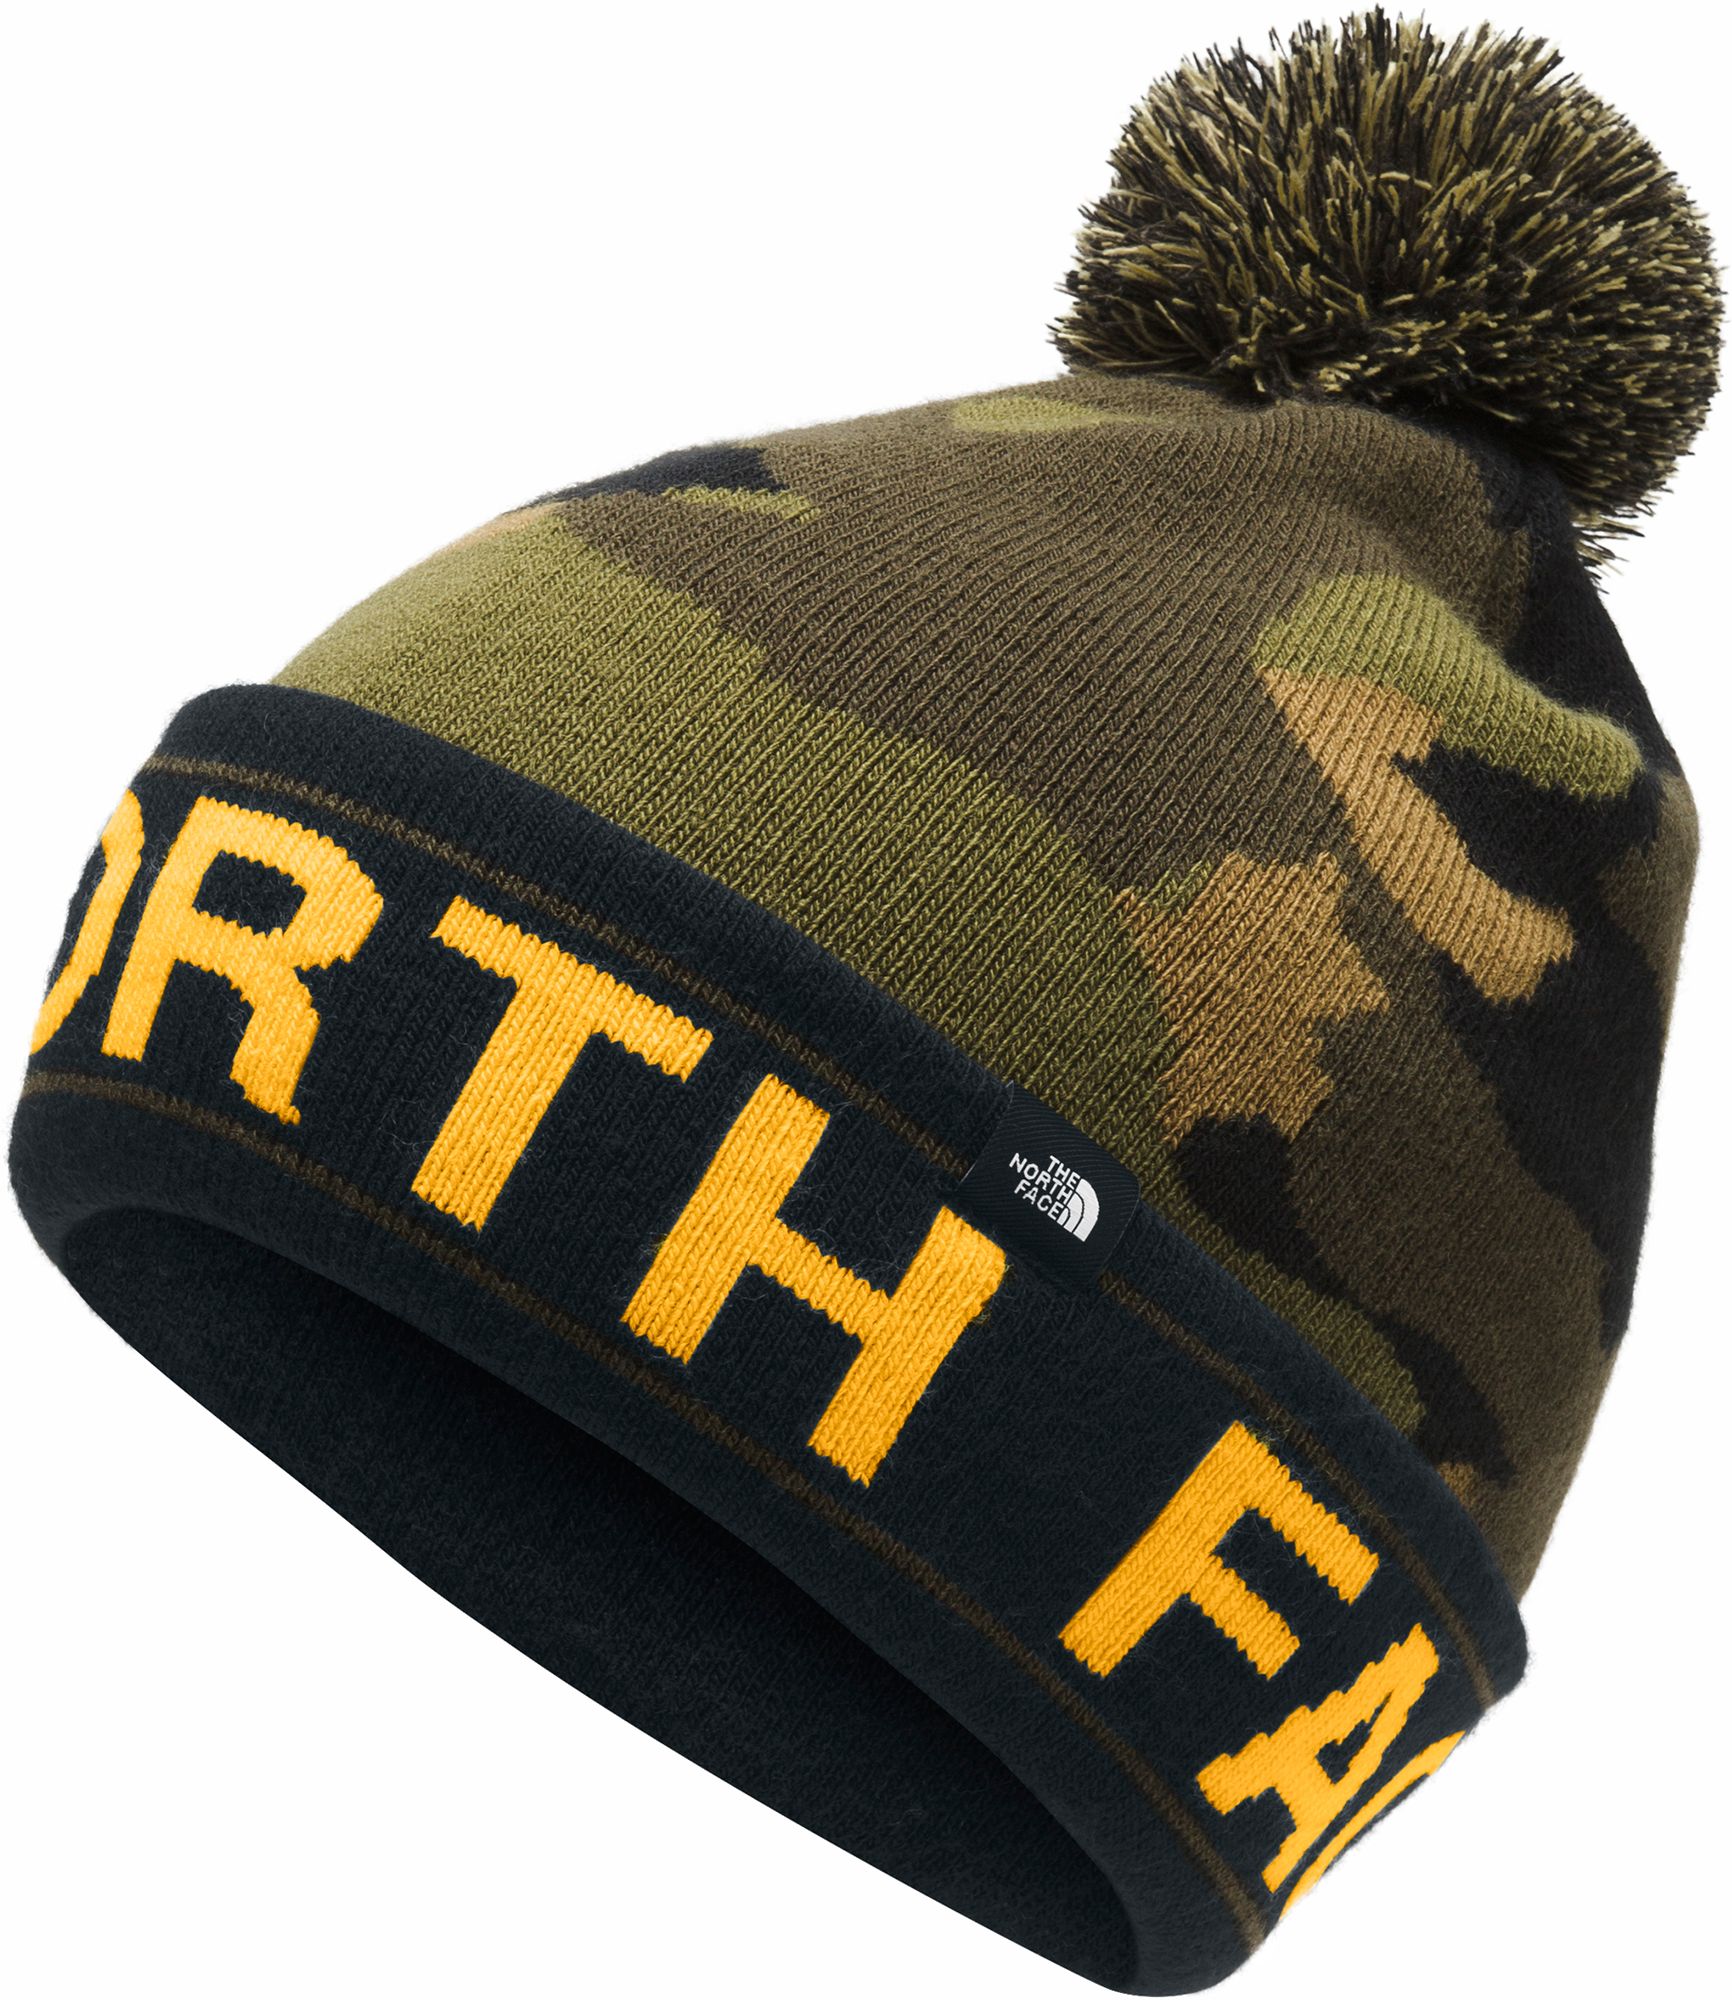 north face youth beanie